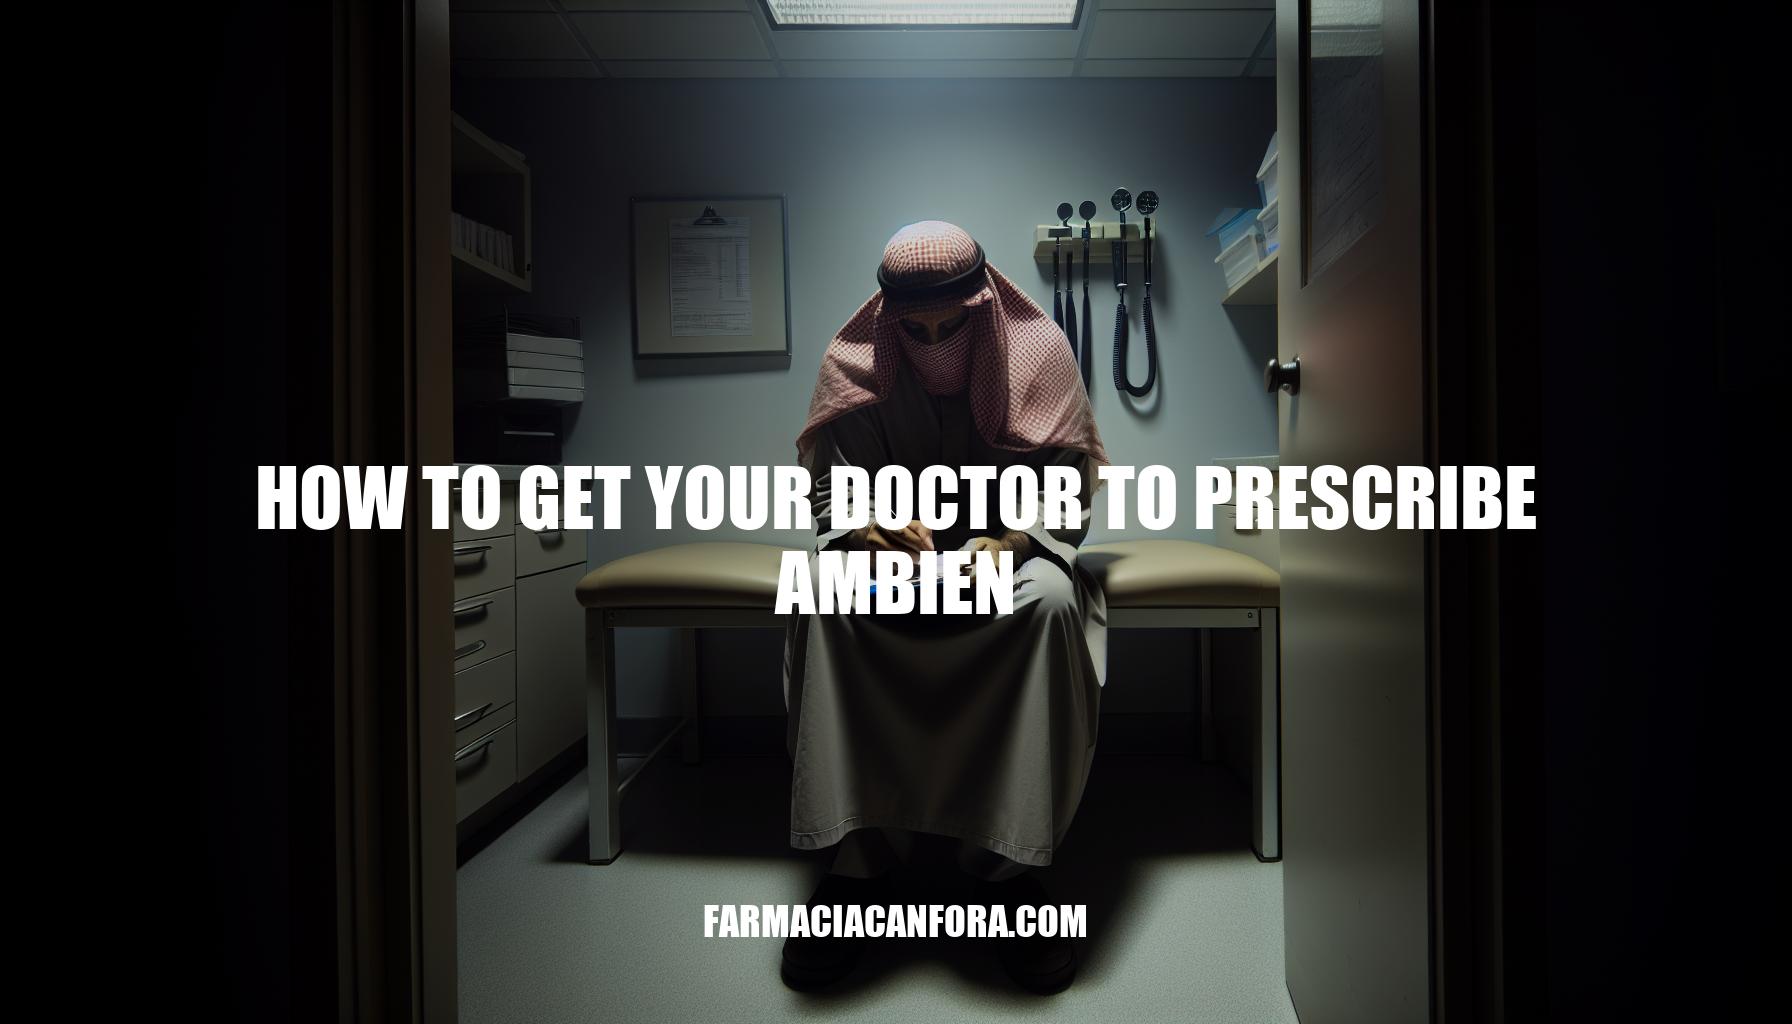 How to Get Your Doctor to Prescribe Ambien